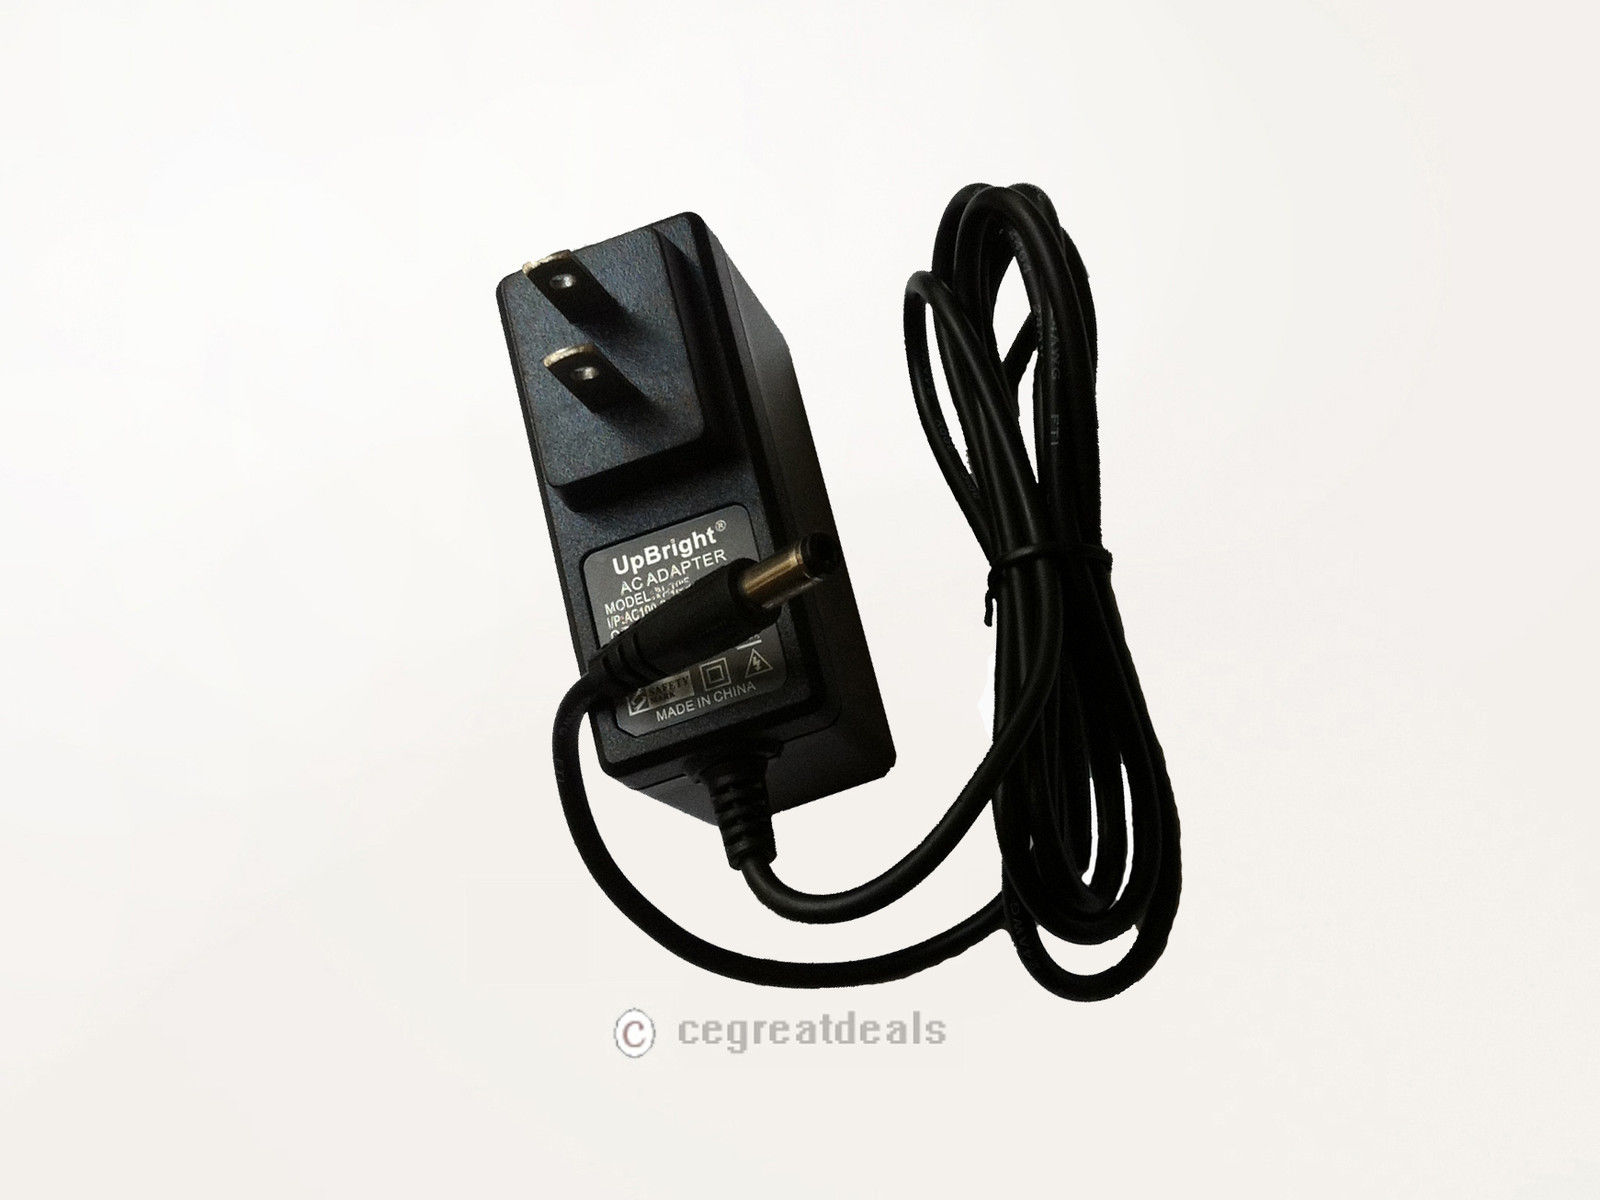 12V AC Adapter For Asian Power Devices Inc N14939 Supply Cord Wall Home Charger